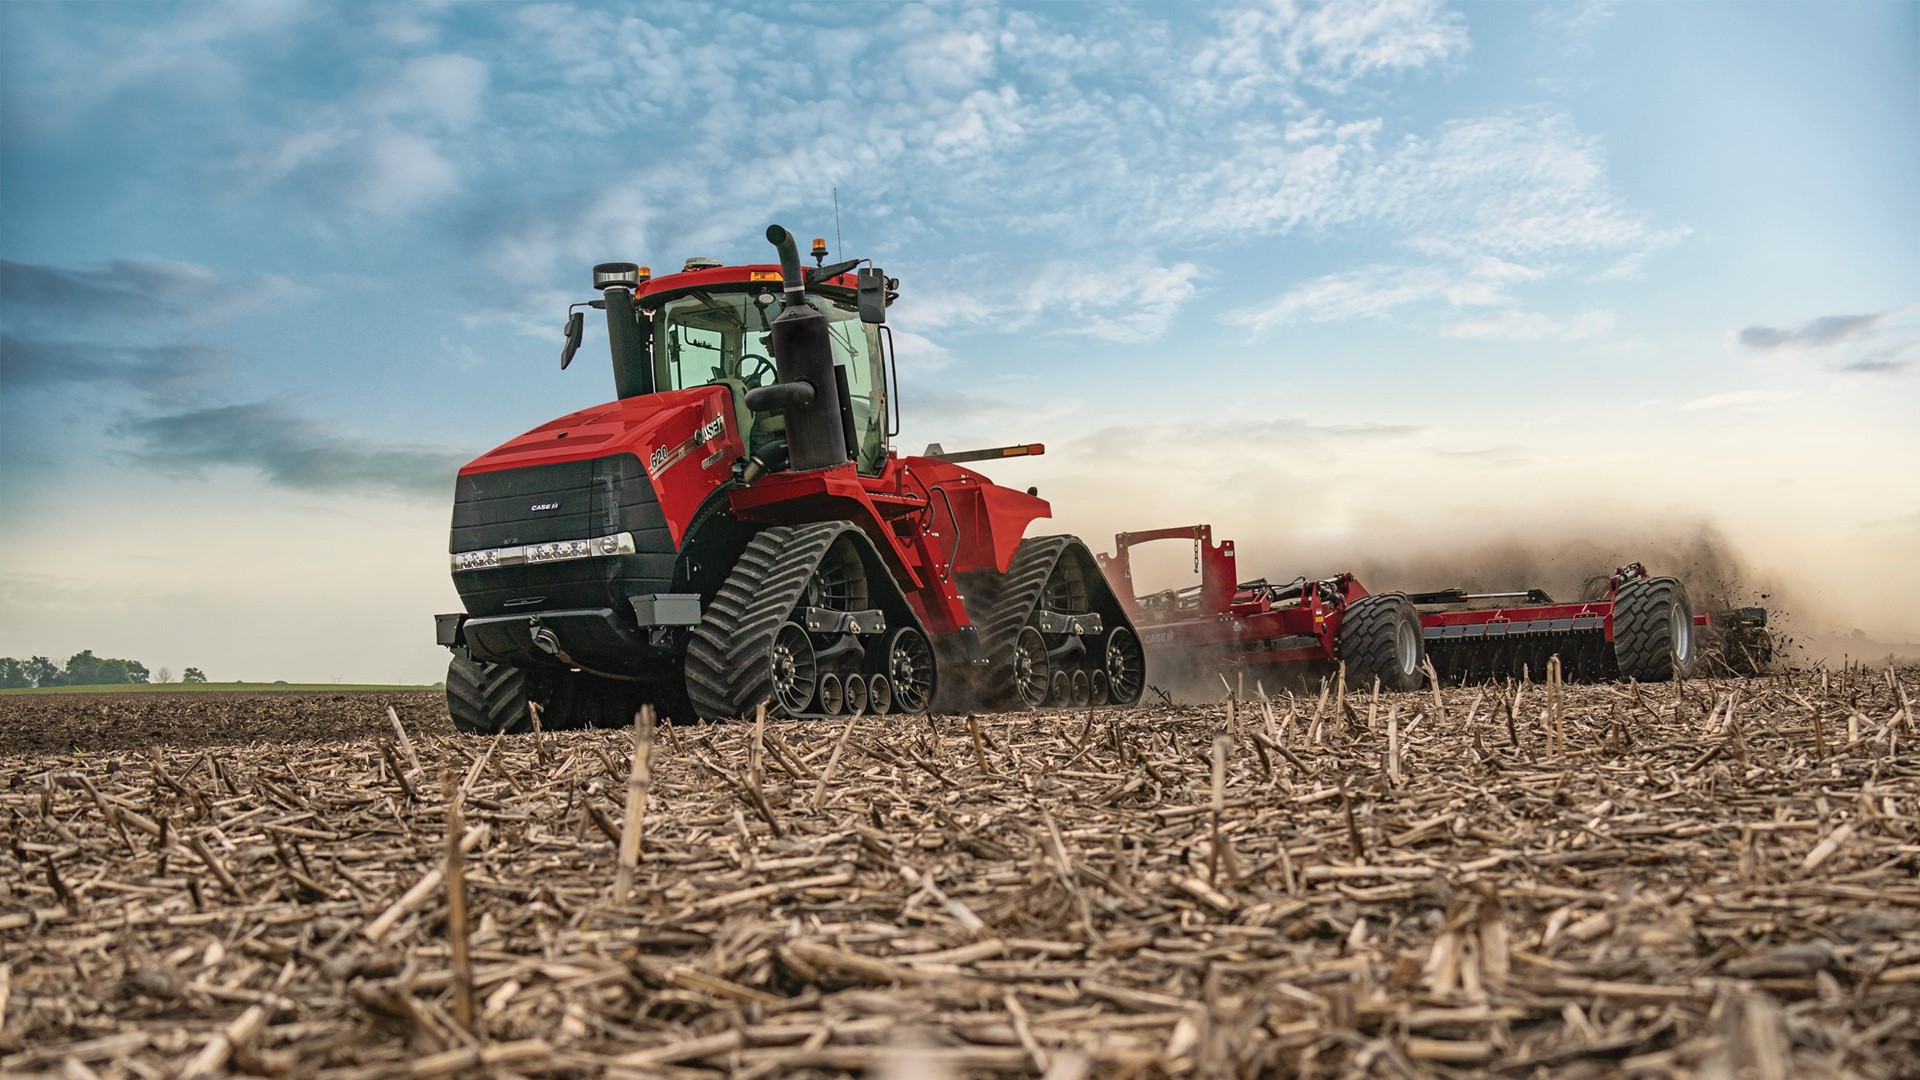 The award-winning AFS Connect Steiger series tractor combines proven power with a redesigned cab and advanced technolo